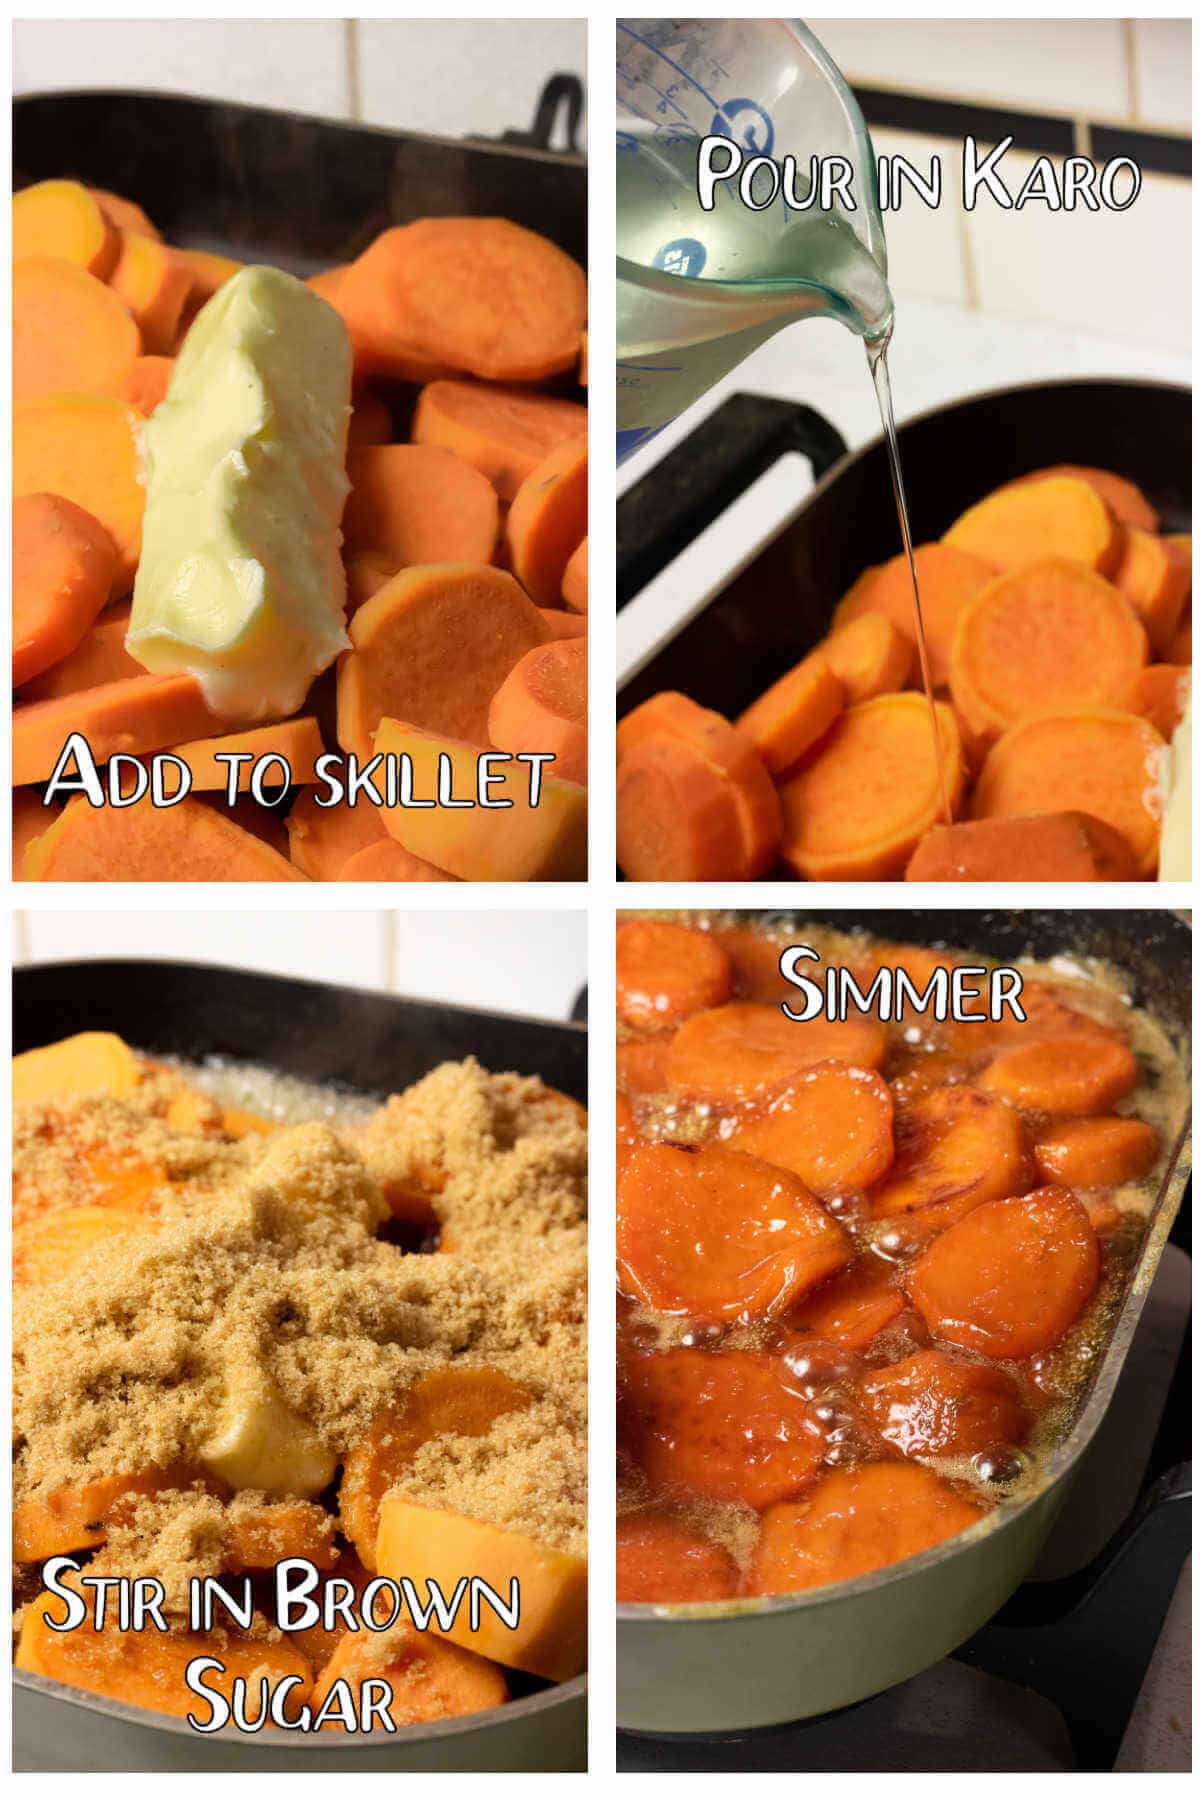 Photos showing how easy it is to make candied sweet potatoes.